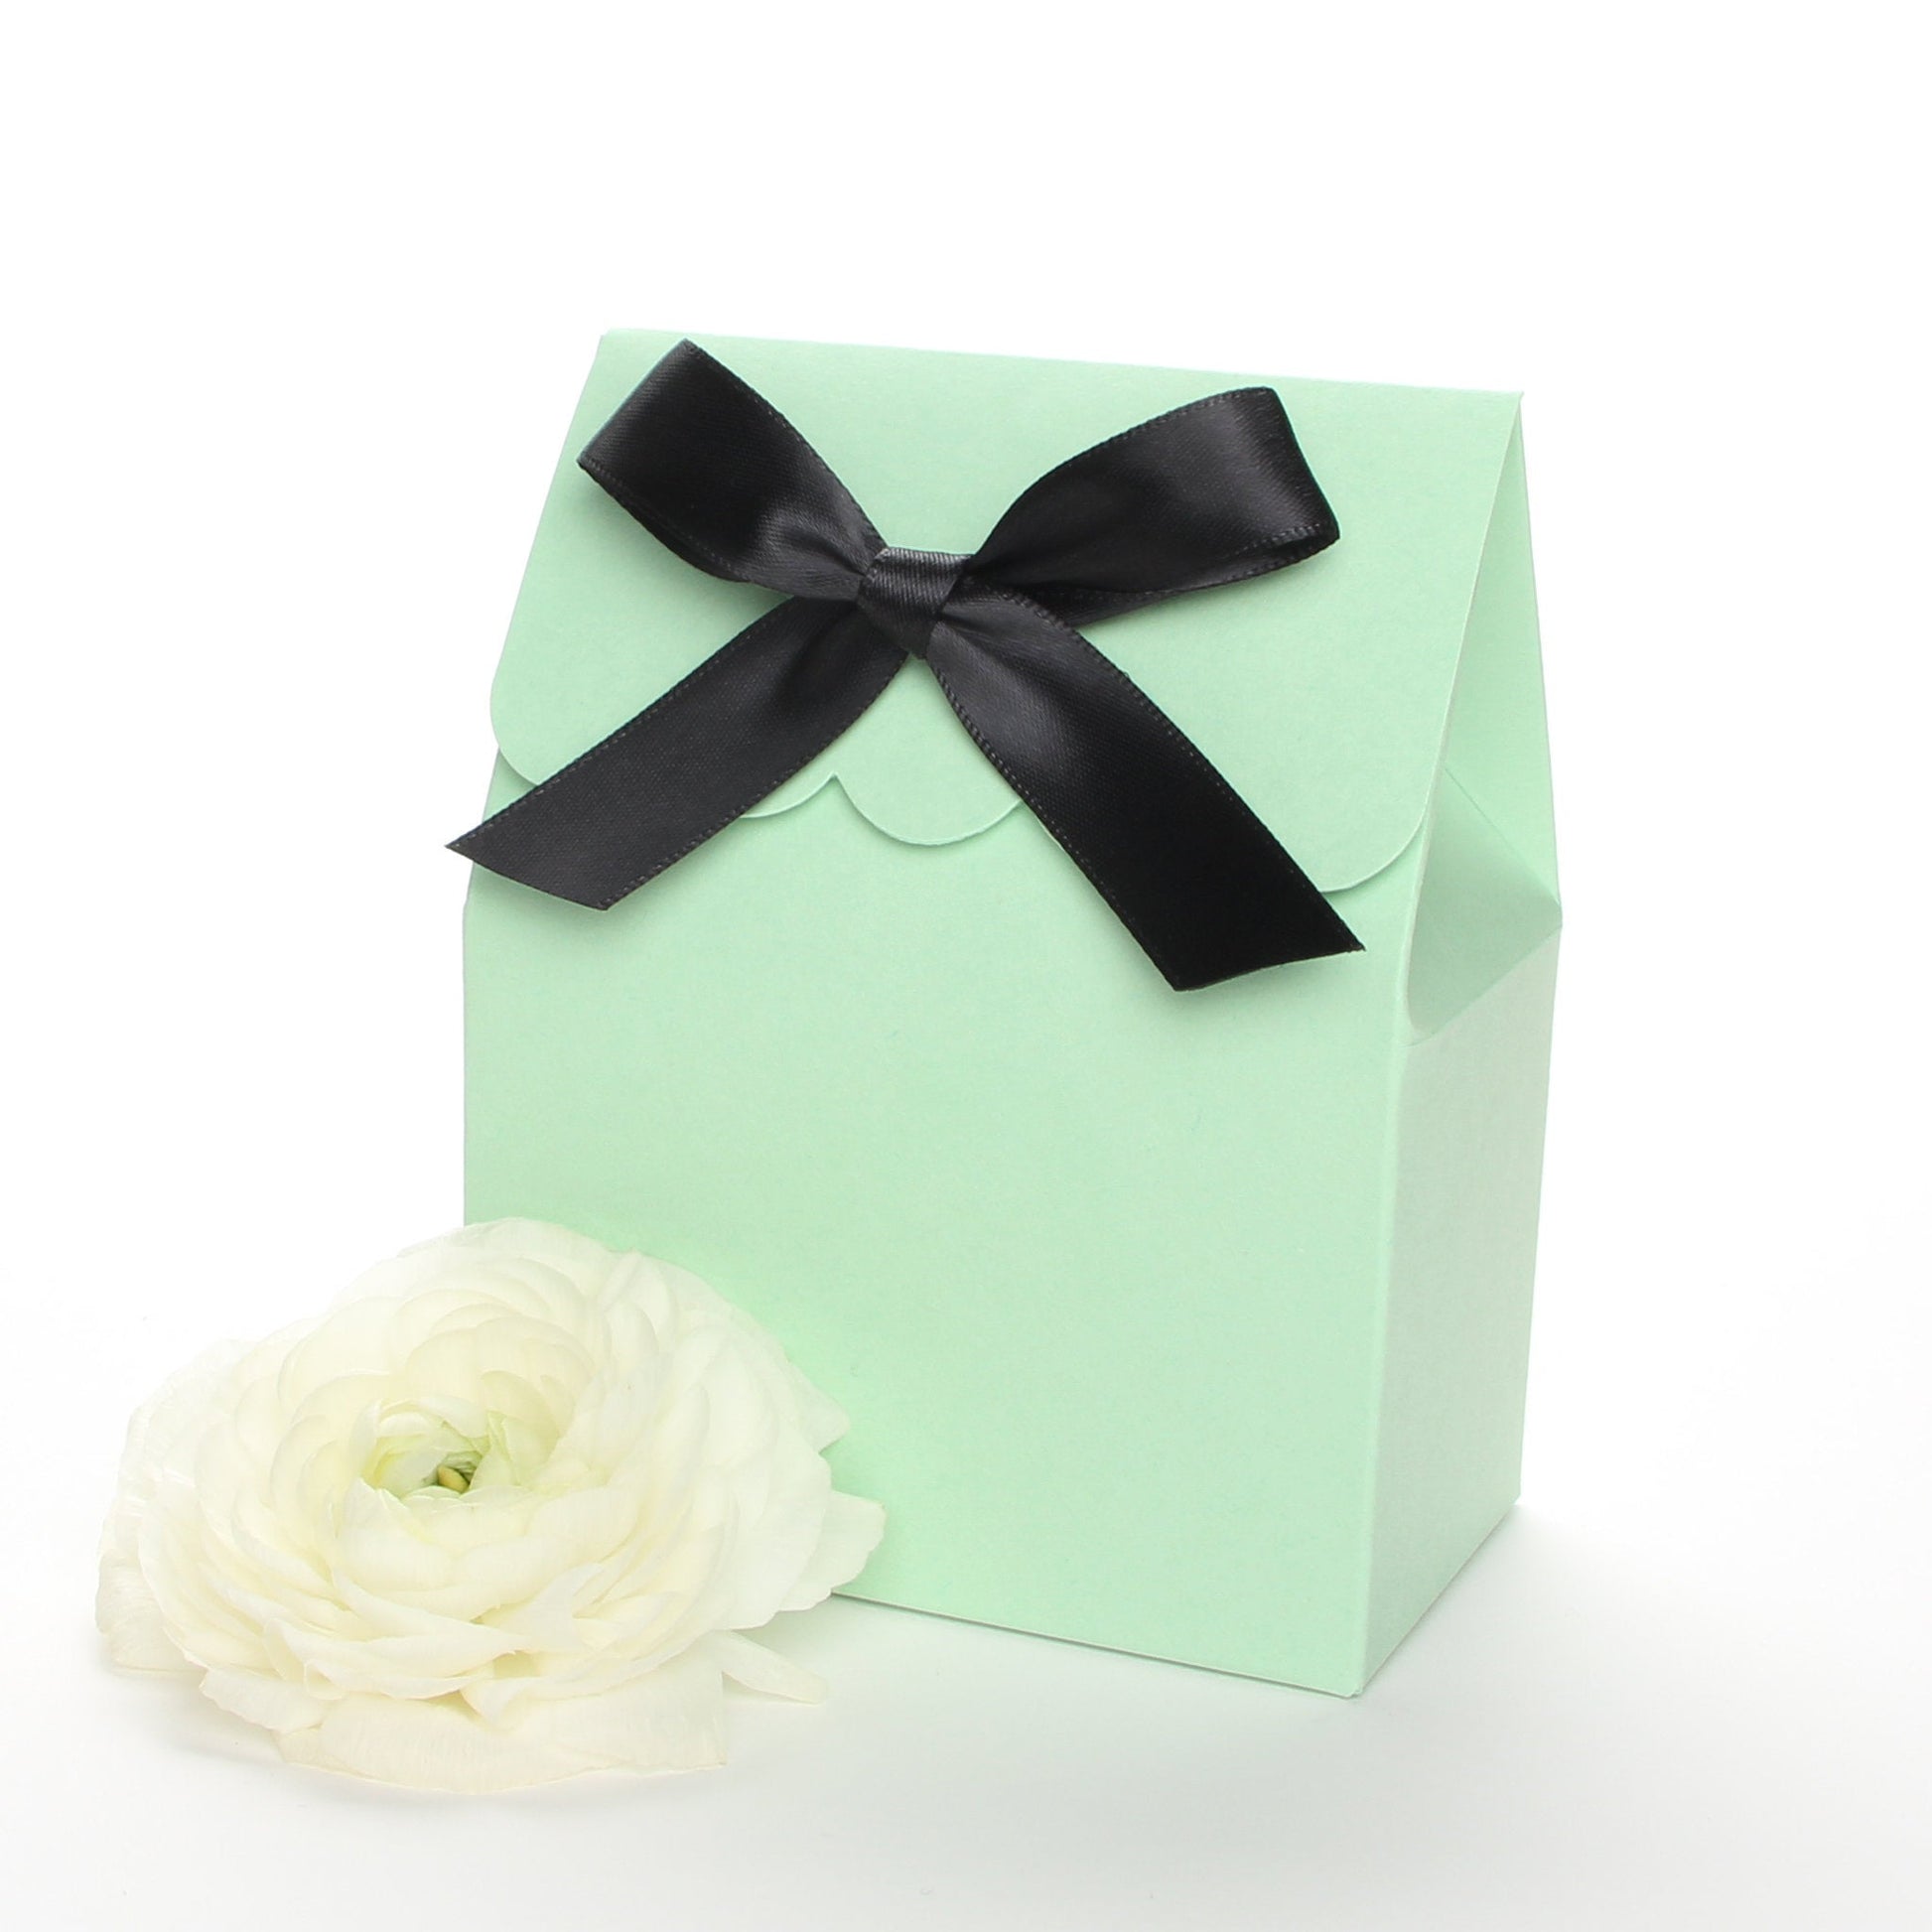 Lux Party’s mint green favor box with a scalloped edge and a black satin bow next to white ranunculus flowers.